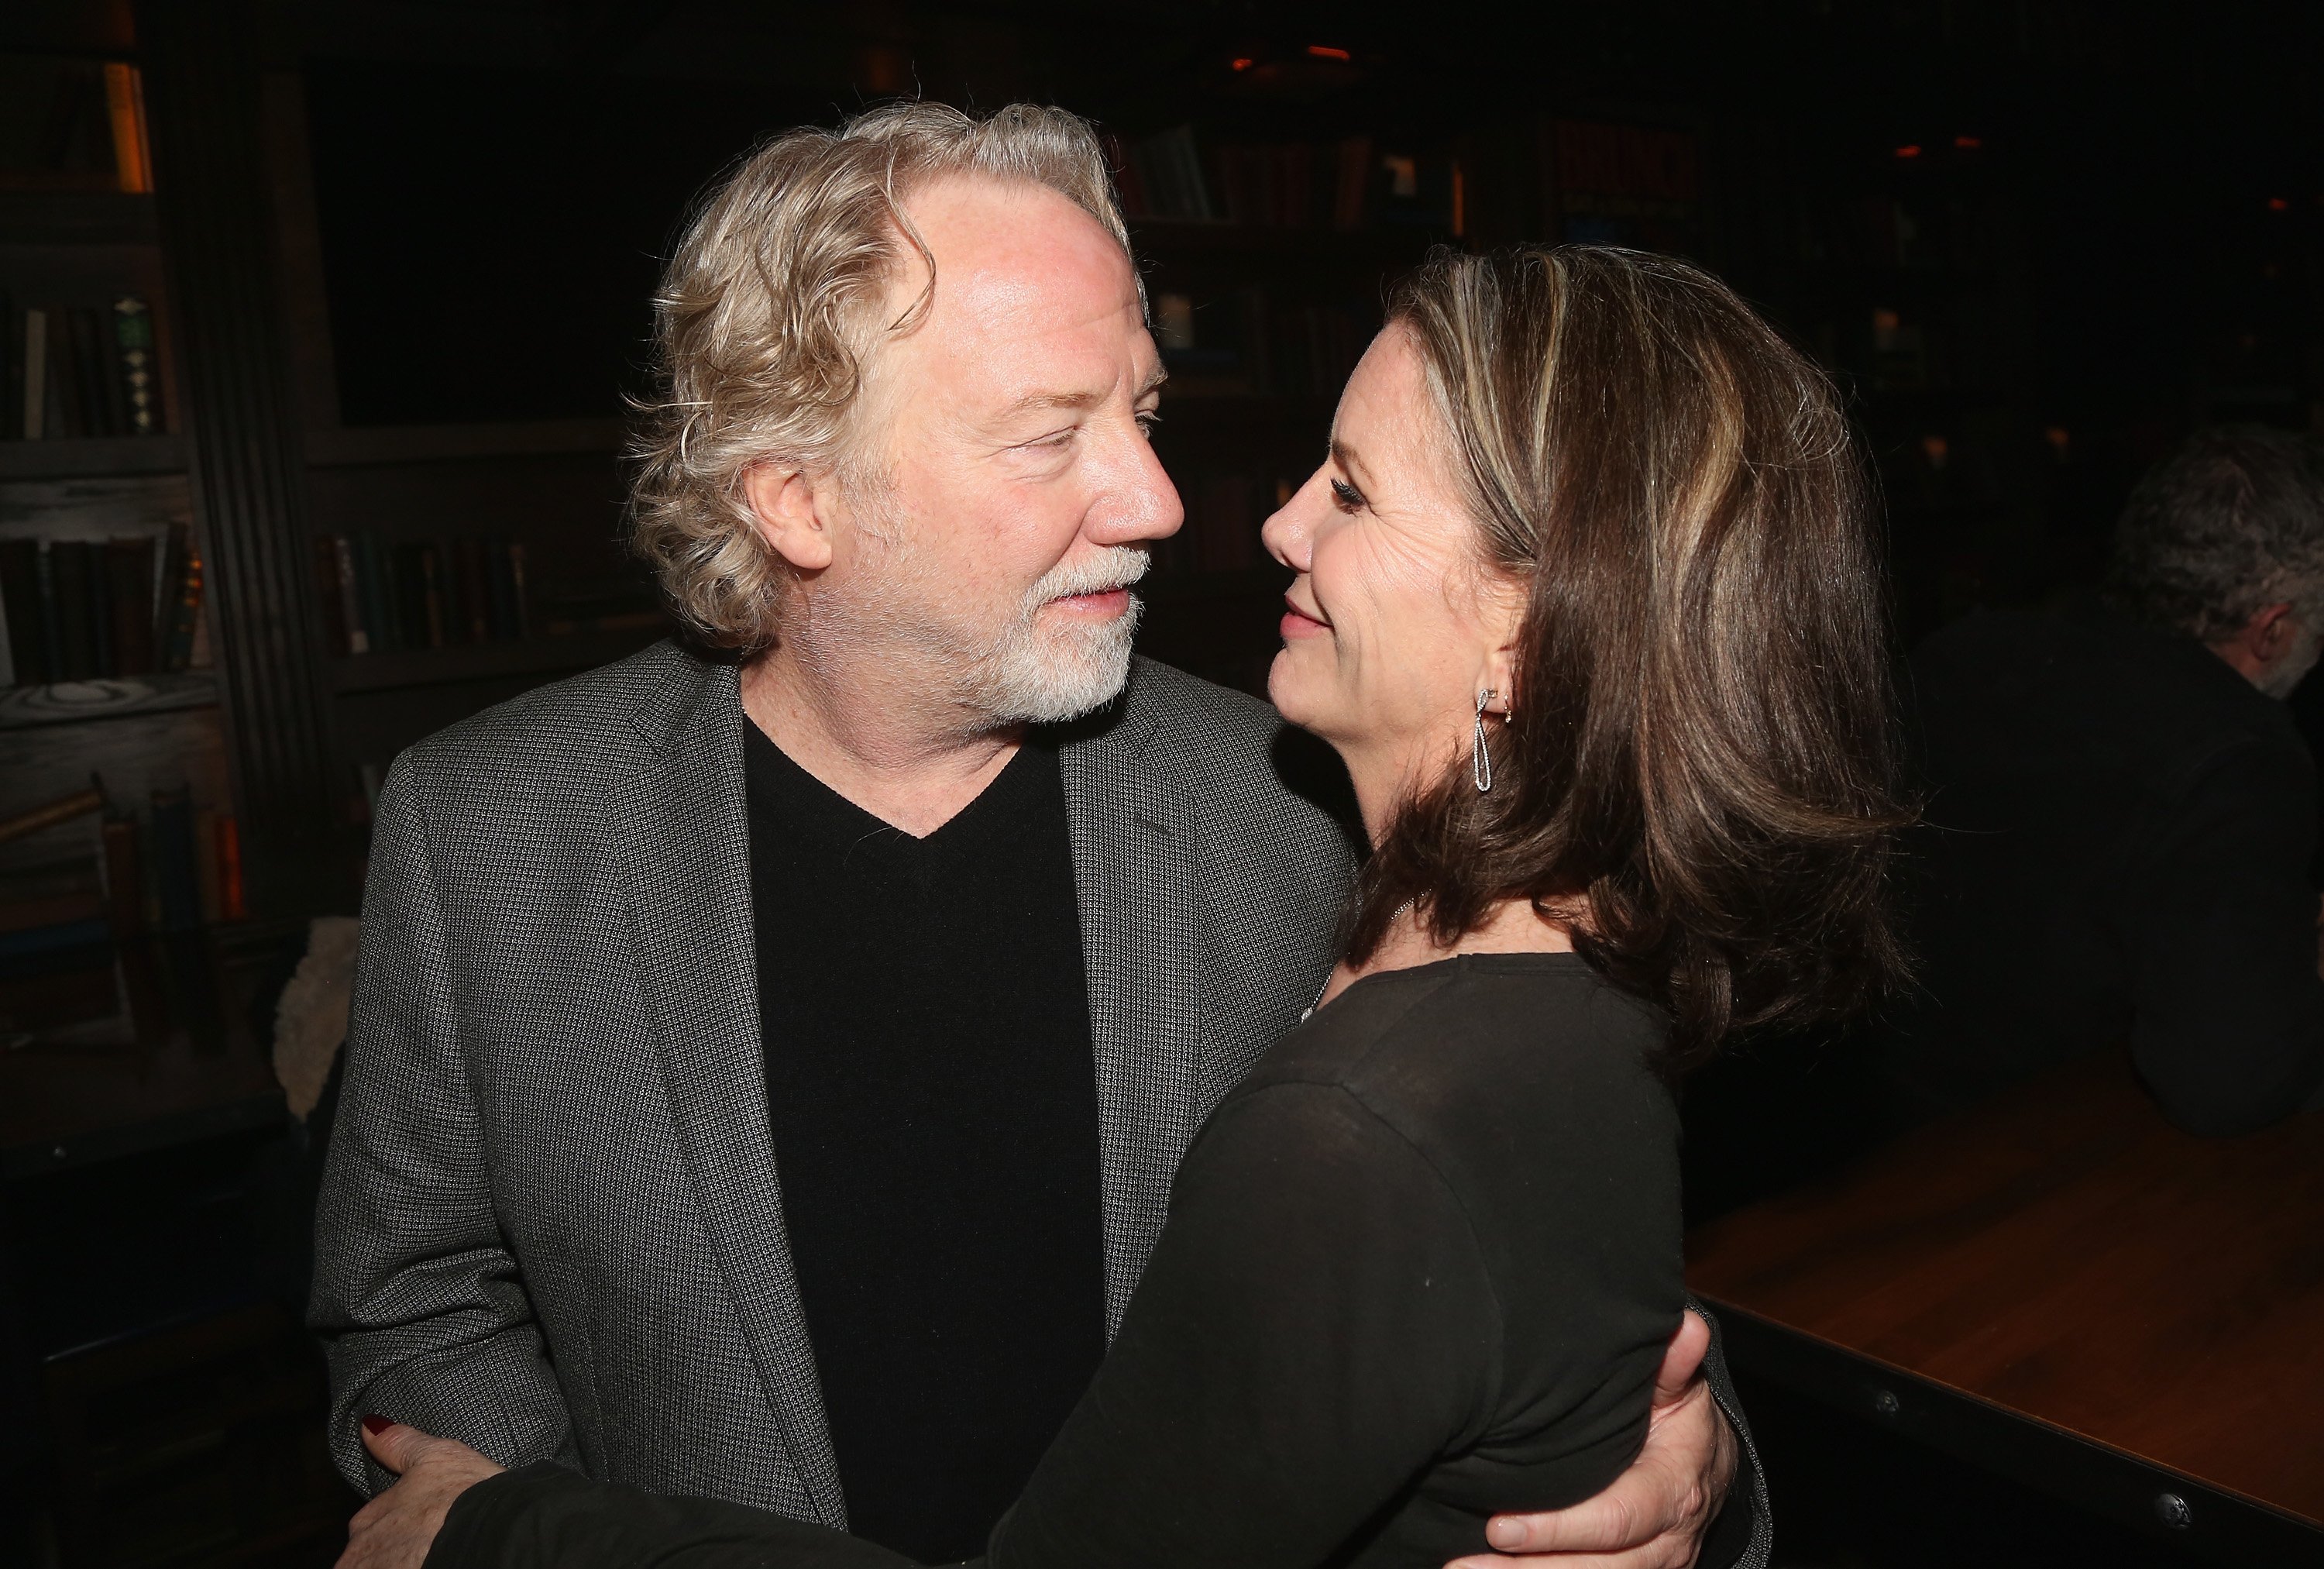 Timothy Busfield and Melissa Gilbert, who bought a house in the Catskills in 2019, look at each other lovingly.